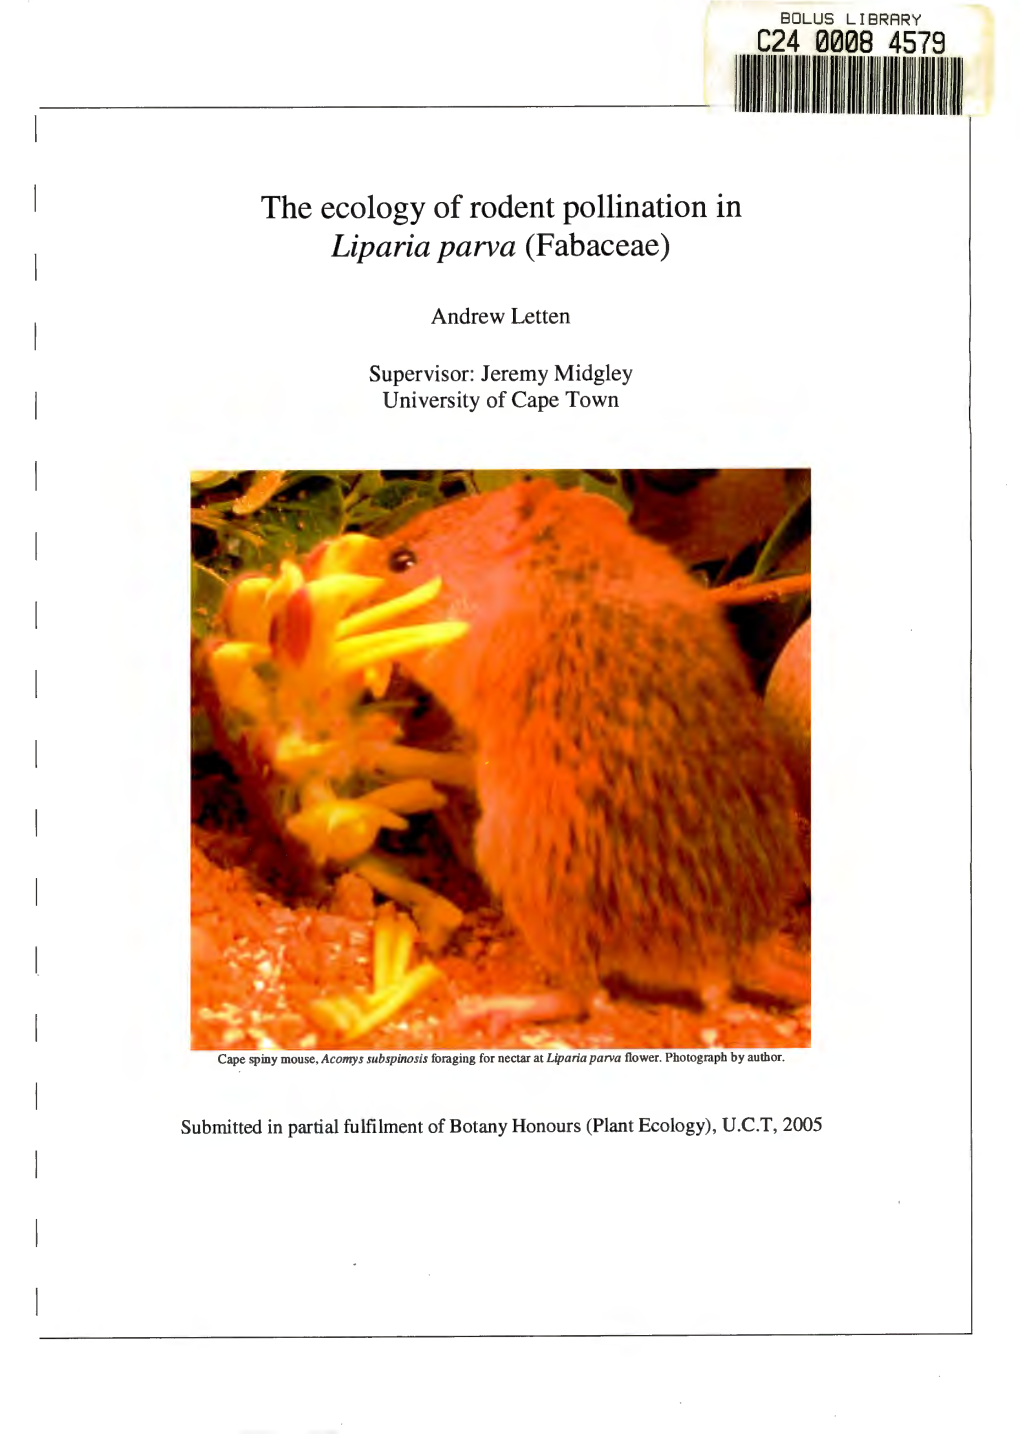 The Ecology of Rodent Pollination in Liparia Parva (Fabaceae)